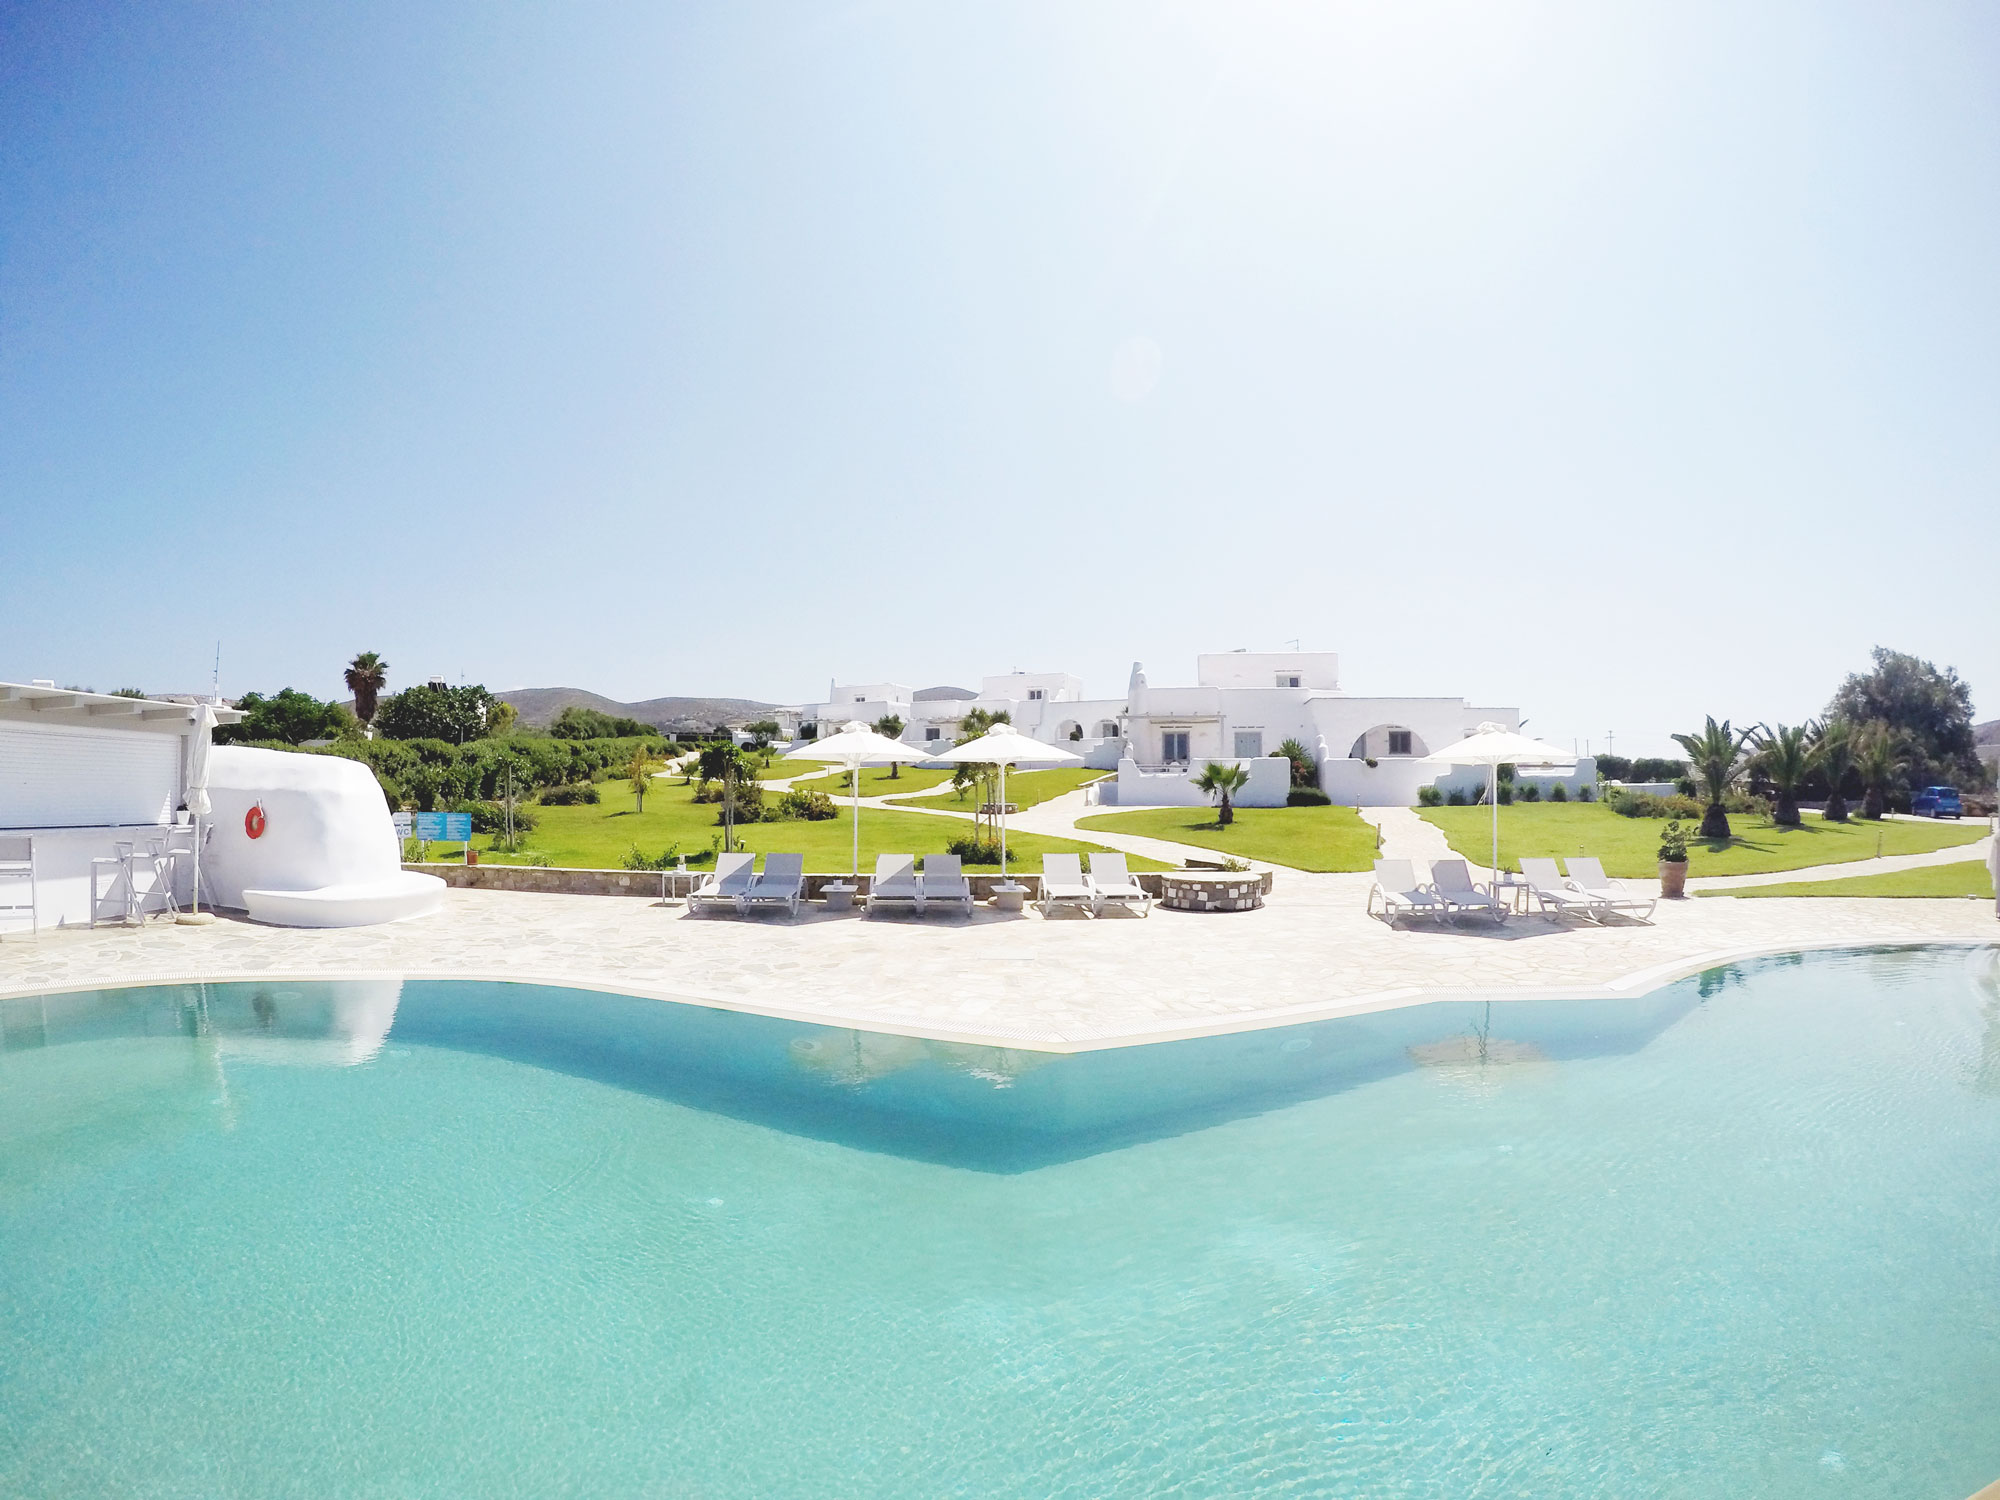 Angels Villas, Naousa - Boutique hotel in Paros, Greece - Styleat30 - TheXperienceHQ - Hotel Review 09